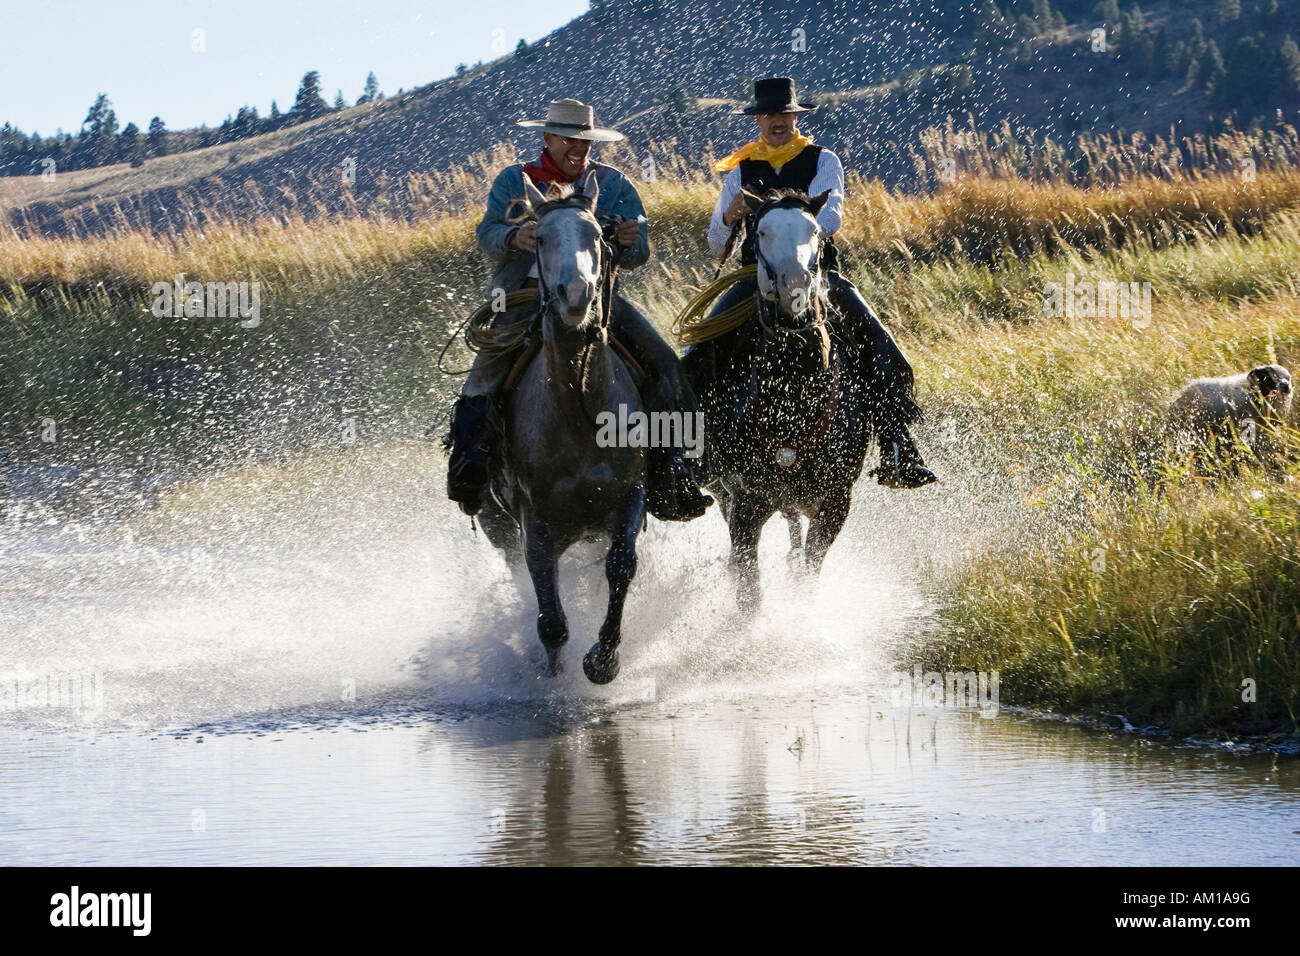 Cowboys riding in water, wildwest, Oregon, USA Stock Photo